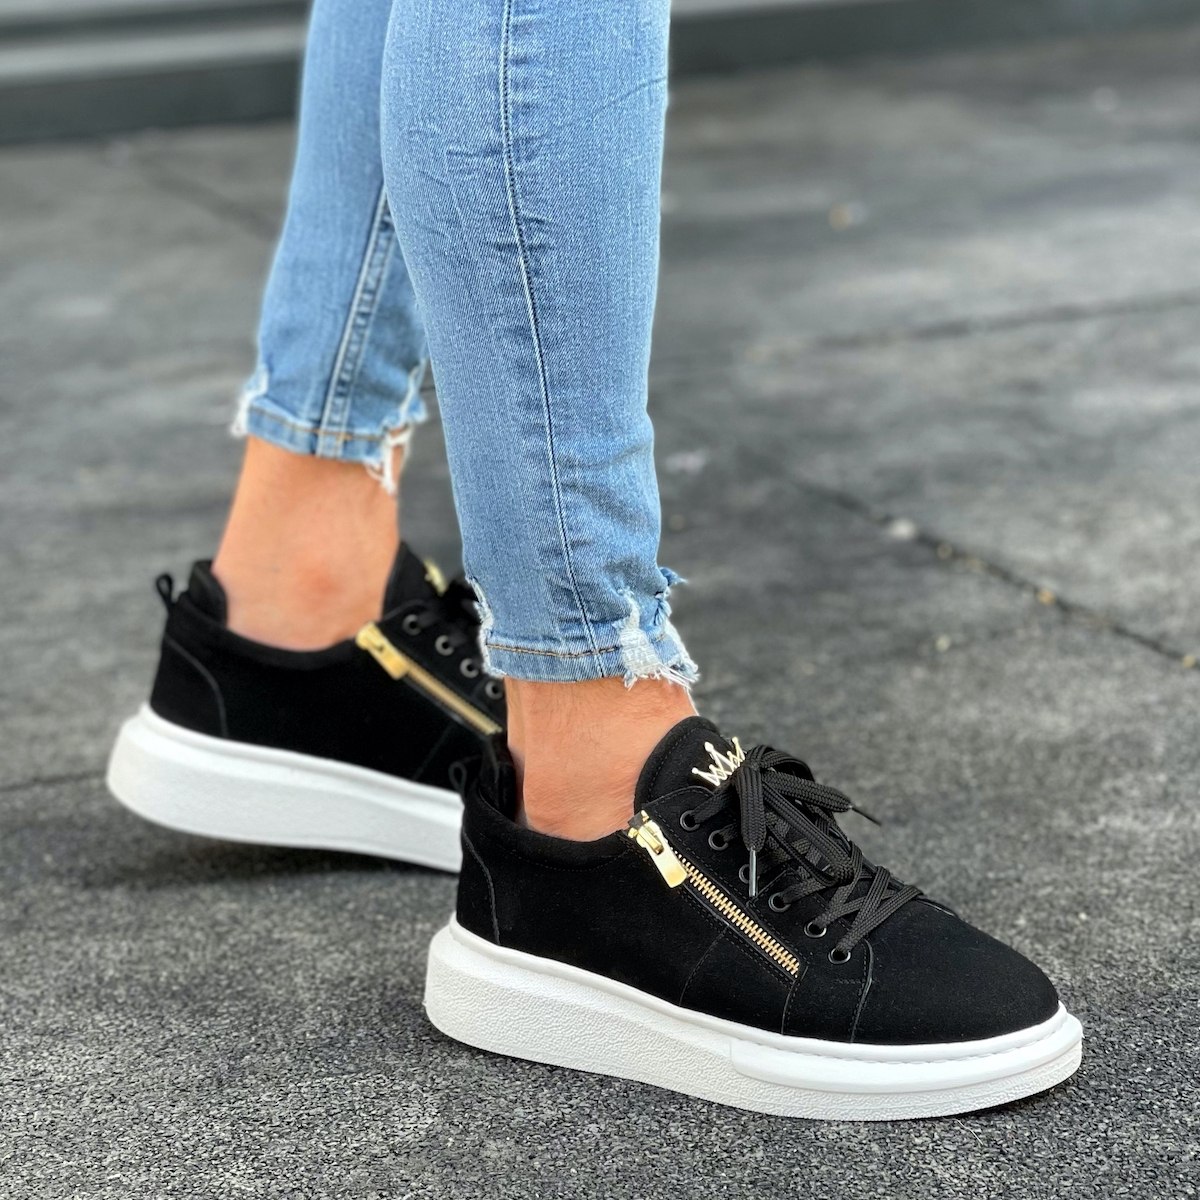 Chunky Suede Sneakers Gold Zipper Designer Shoes Black | Martin Valen